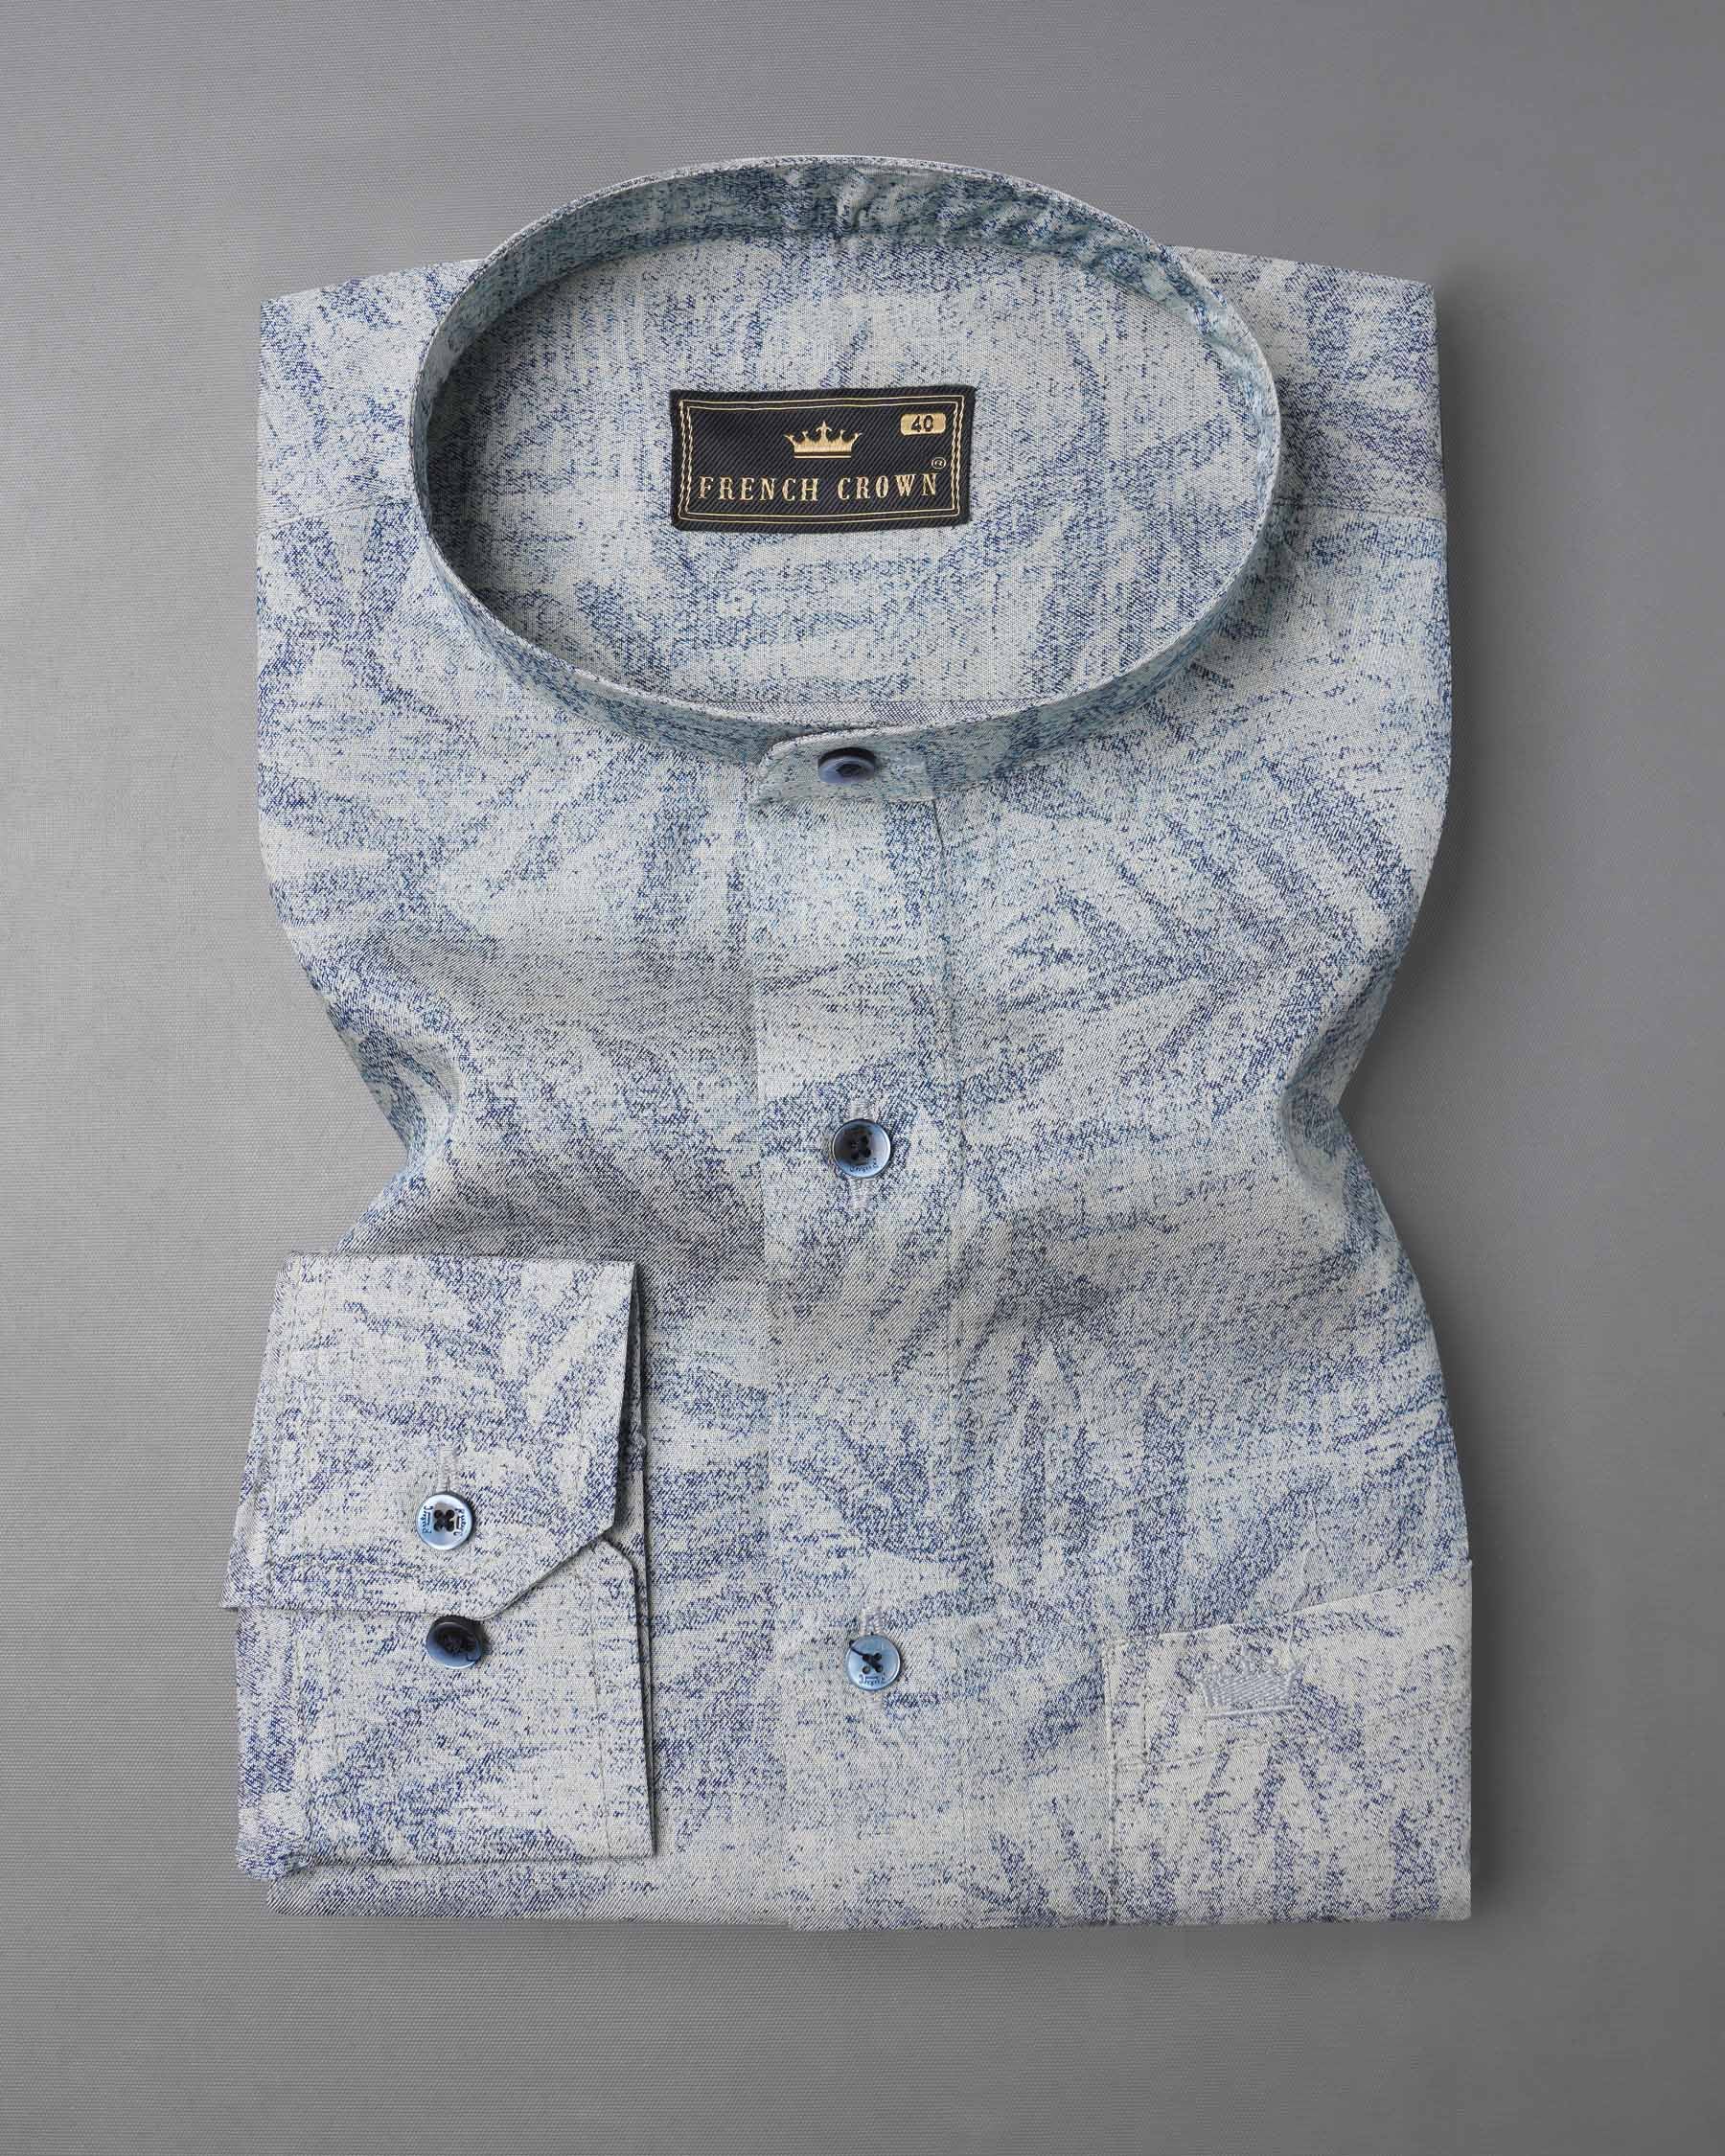 Raven Blue and Zircon Gray Leaves Textured Royal Oxford Shirt 7393-M-BLE-38,7393-M-BLE-38,7393-M-BLE-39,7393-M-BLE-39,7393-M-BLE-40,7393-M-BLE-40,7393-M-BLE-42,7393-M-BLE-42,7393-M-BLE-44,7393-M-BLE-44,7393-M-BLE-46,7393-M-BLE-46,7393-M-BLE-48,7393-M-BLE-48,7393-M-BLE-50,7393-M-BLE-50,7393-M-BLE-52,7393-M-BLE-52